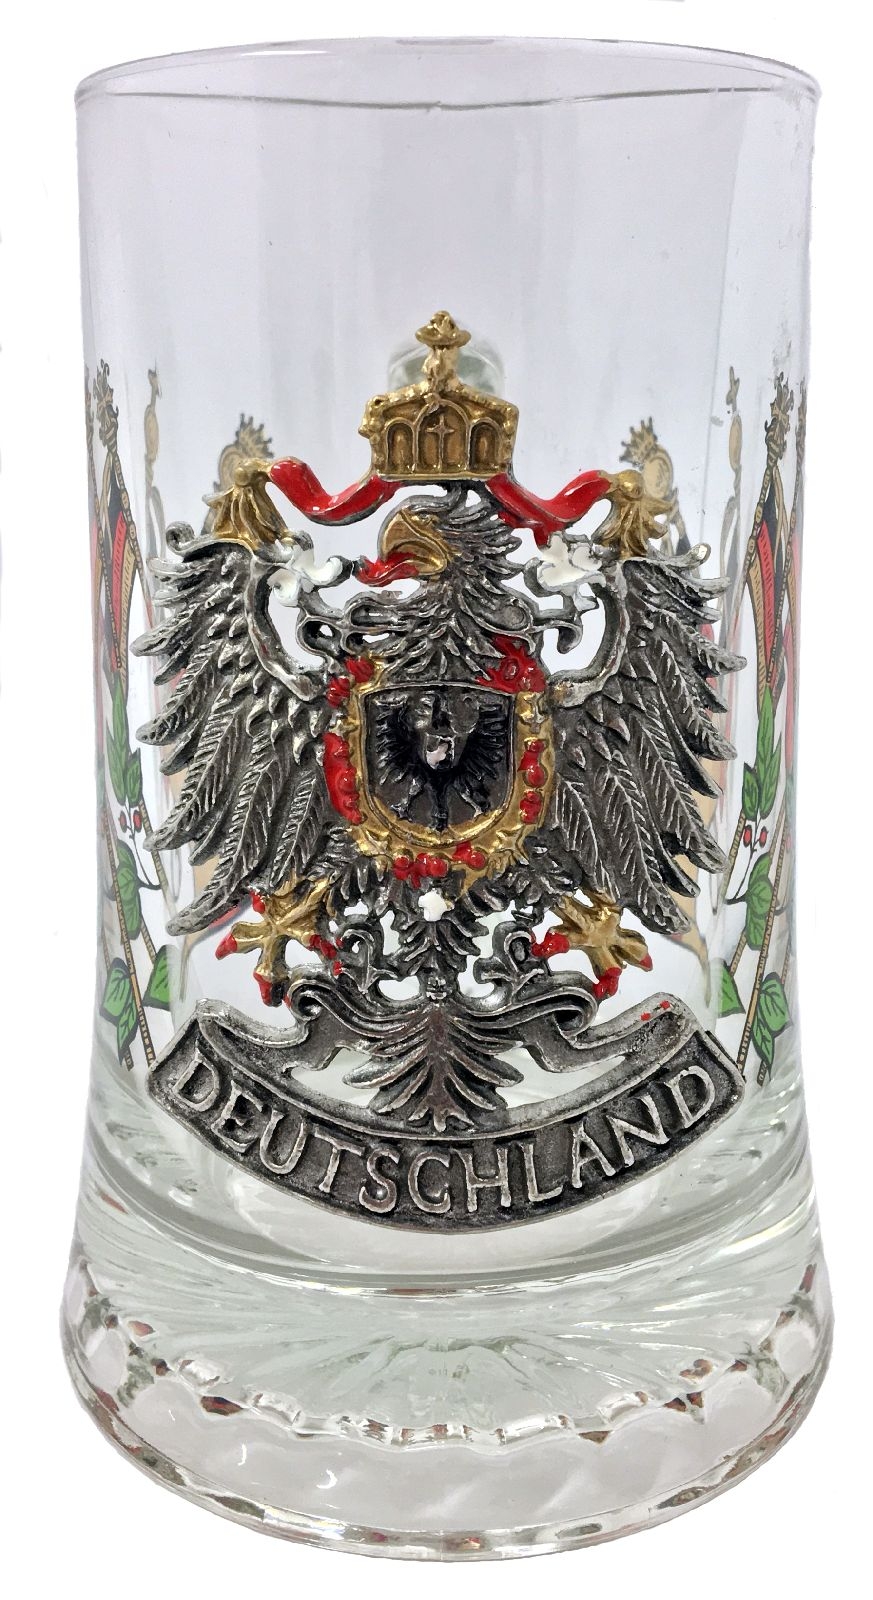 Deutschland Germany Pewter Eagle with Flags Glass European Beer Stein .4 L